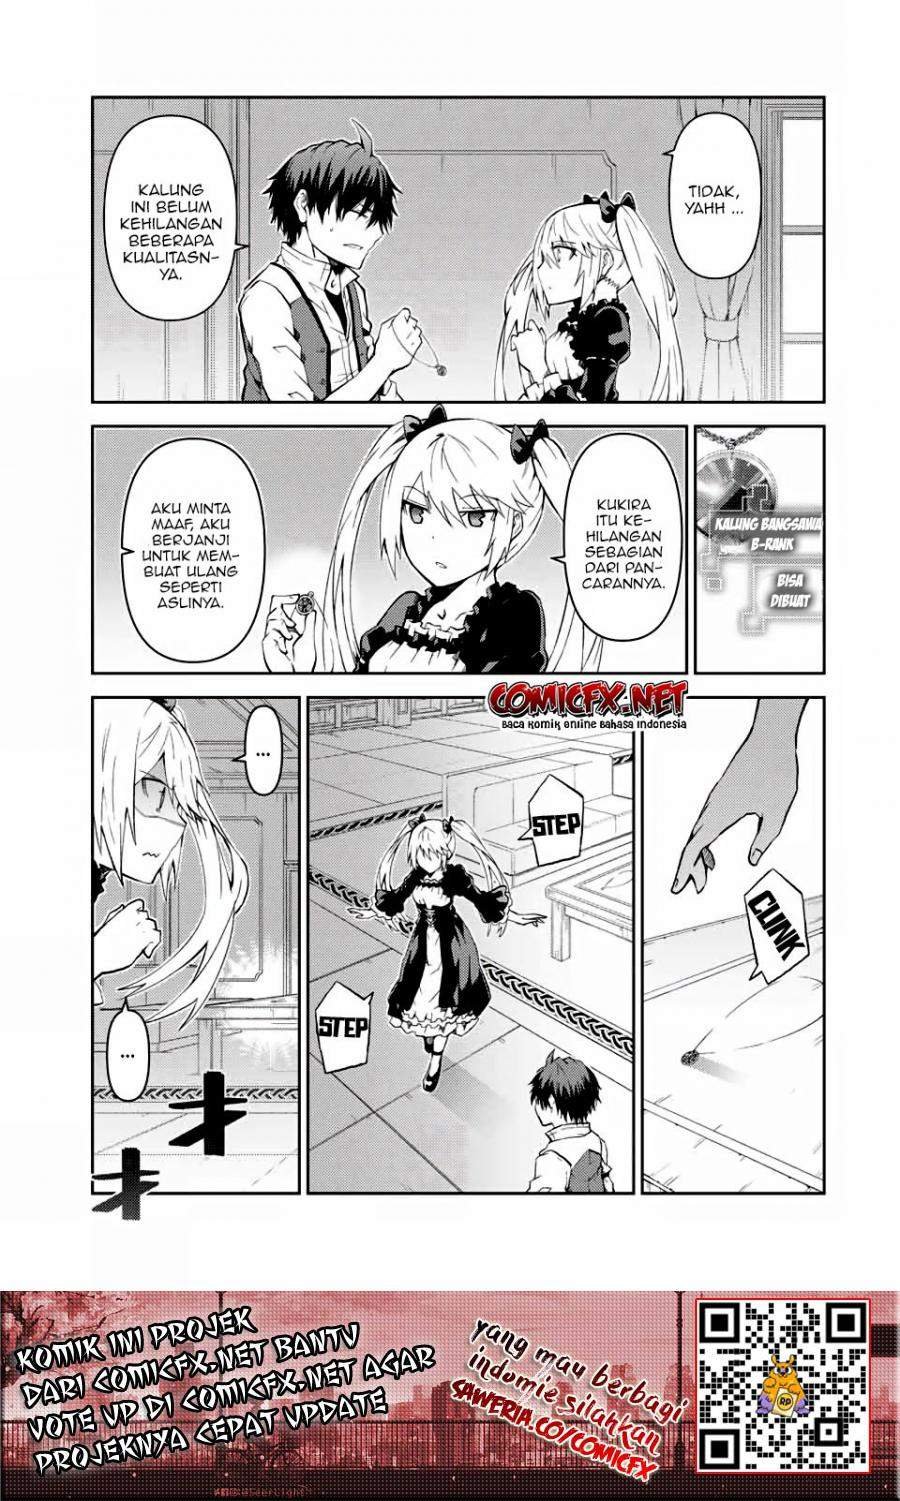 Baca The Weakest Occupation “Blacksmith,” but It’s Actually the Strongest Chapter 15  - GudangKomik